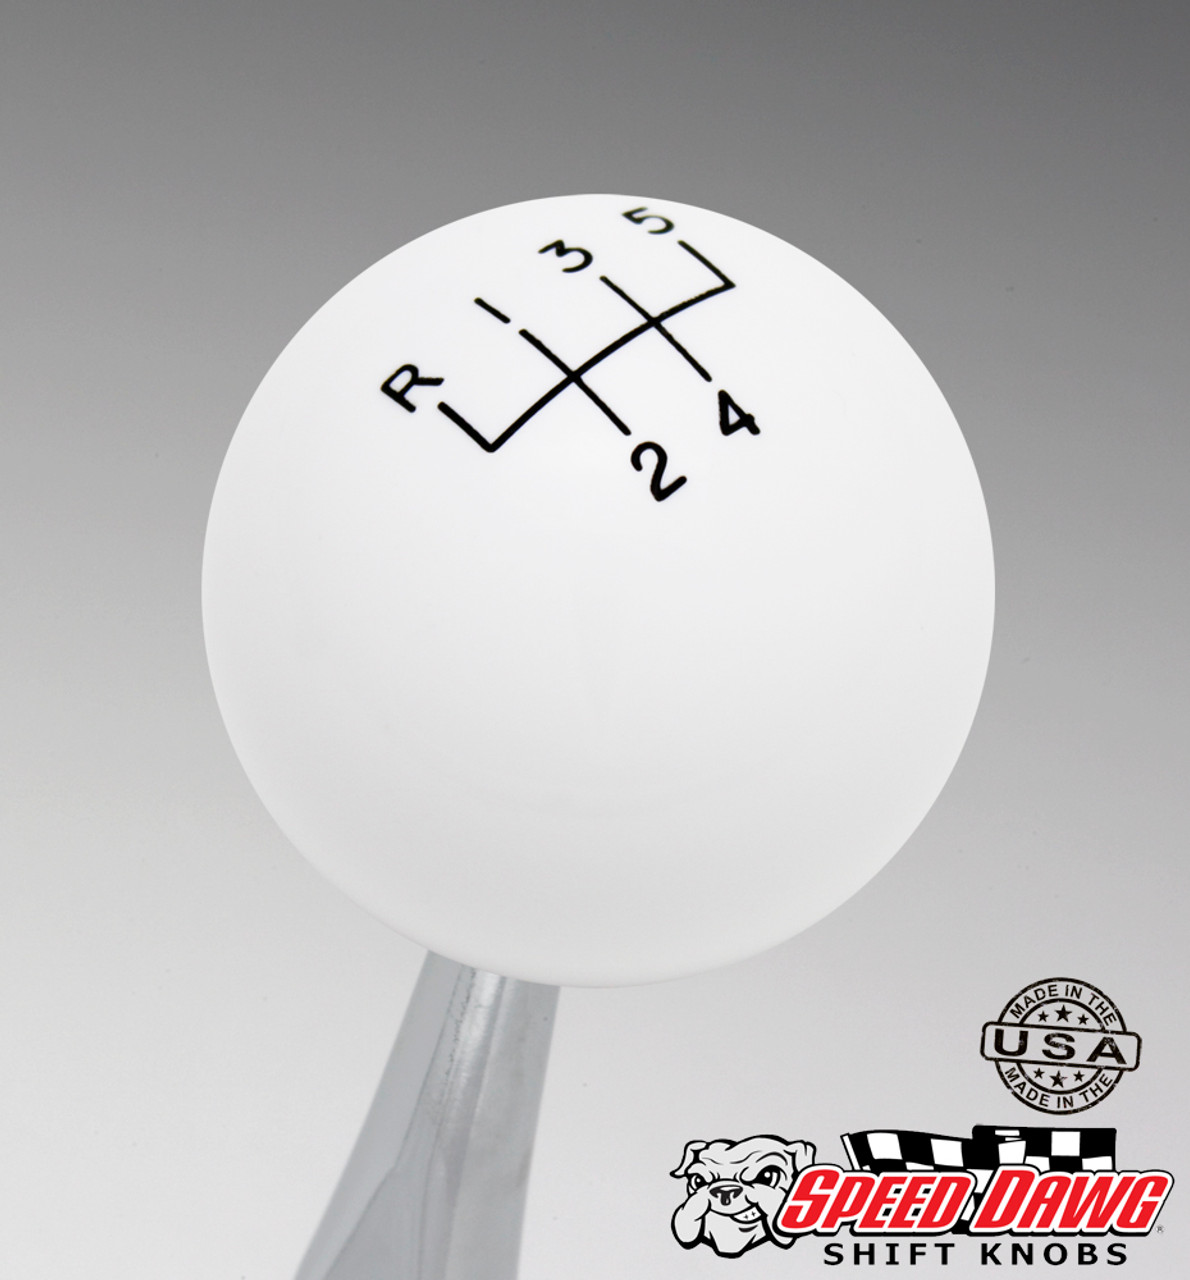 White 5 Speed 5 Upper Right Reverse Upper Left Shift Knob with Engraved Shift Pattern